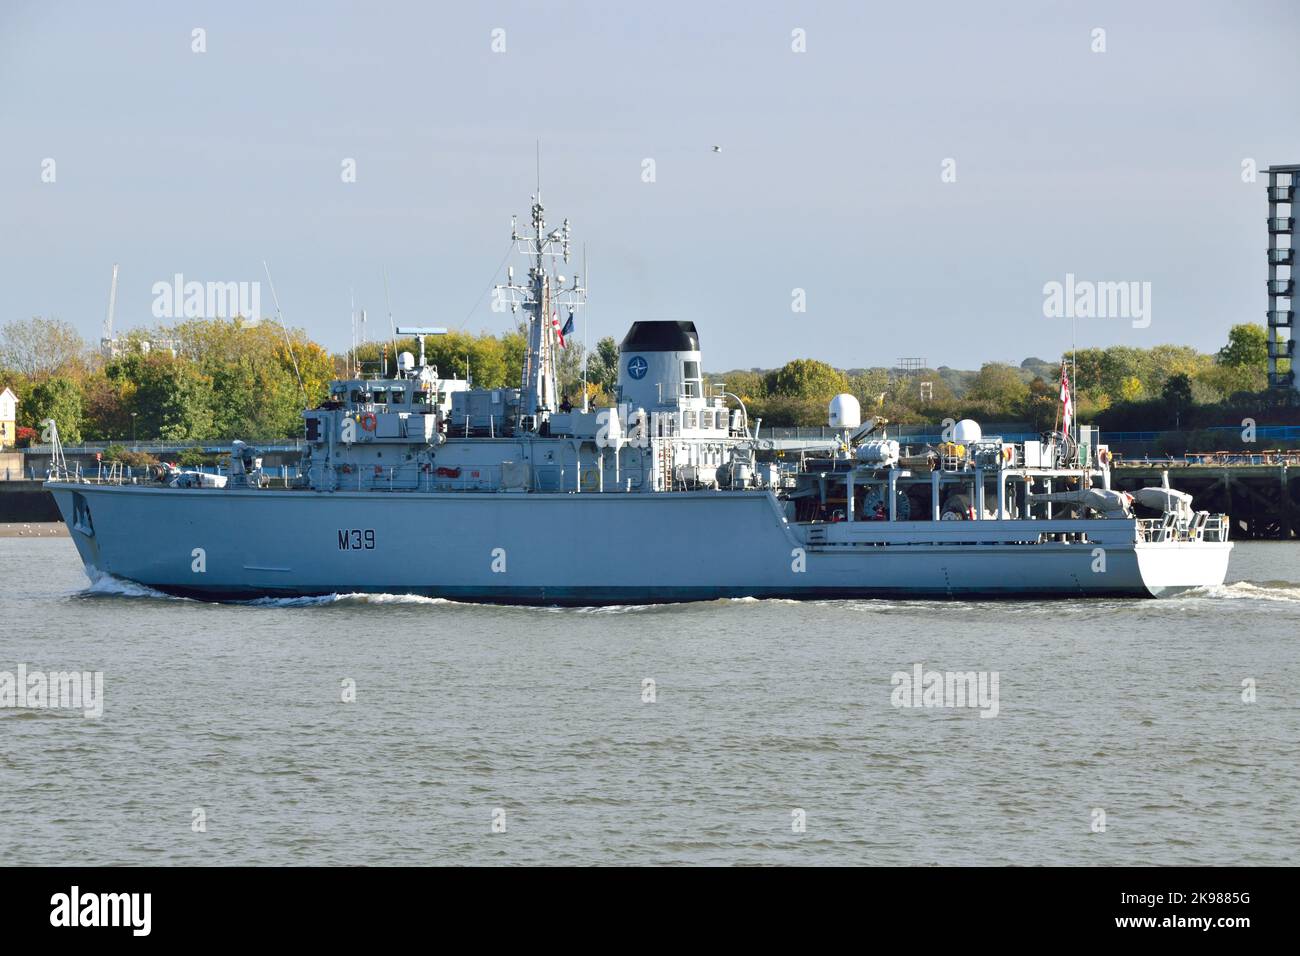 Royal Navy Minesweeper HMS Hurworth M39 an der Themse in London Stockfoto